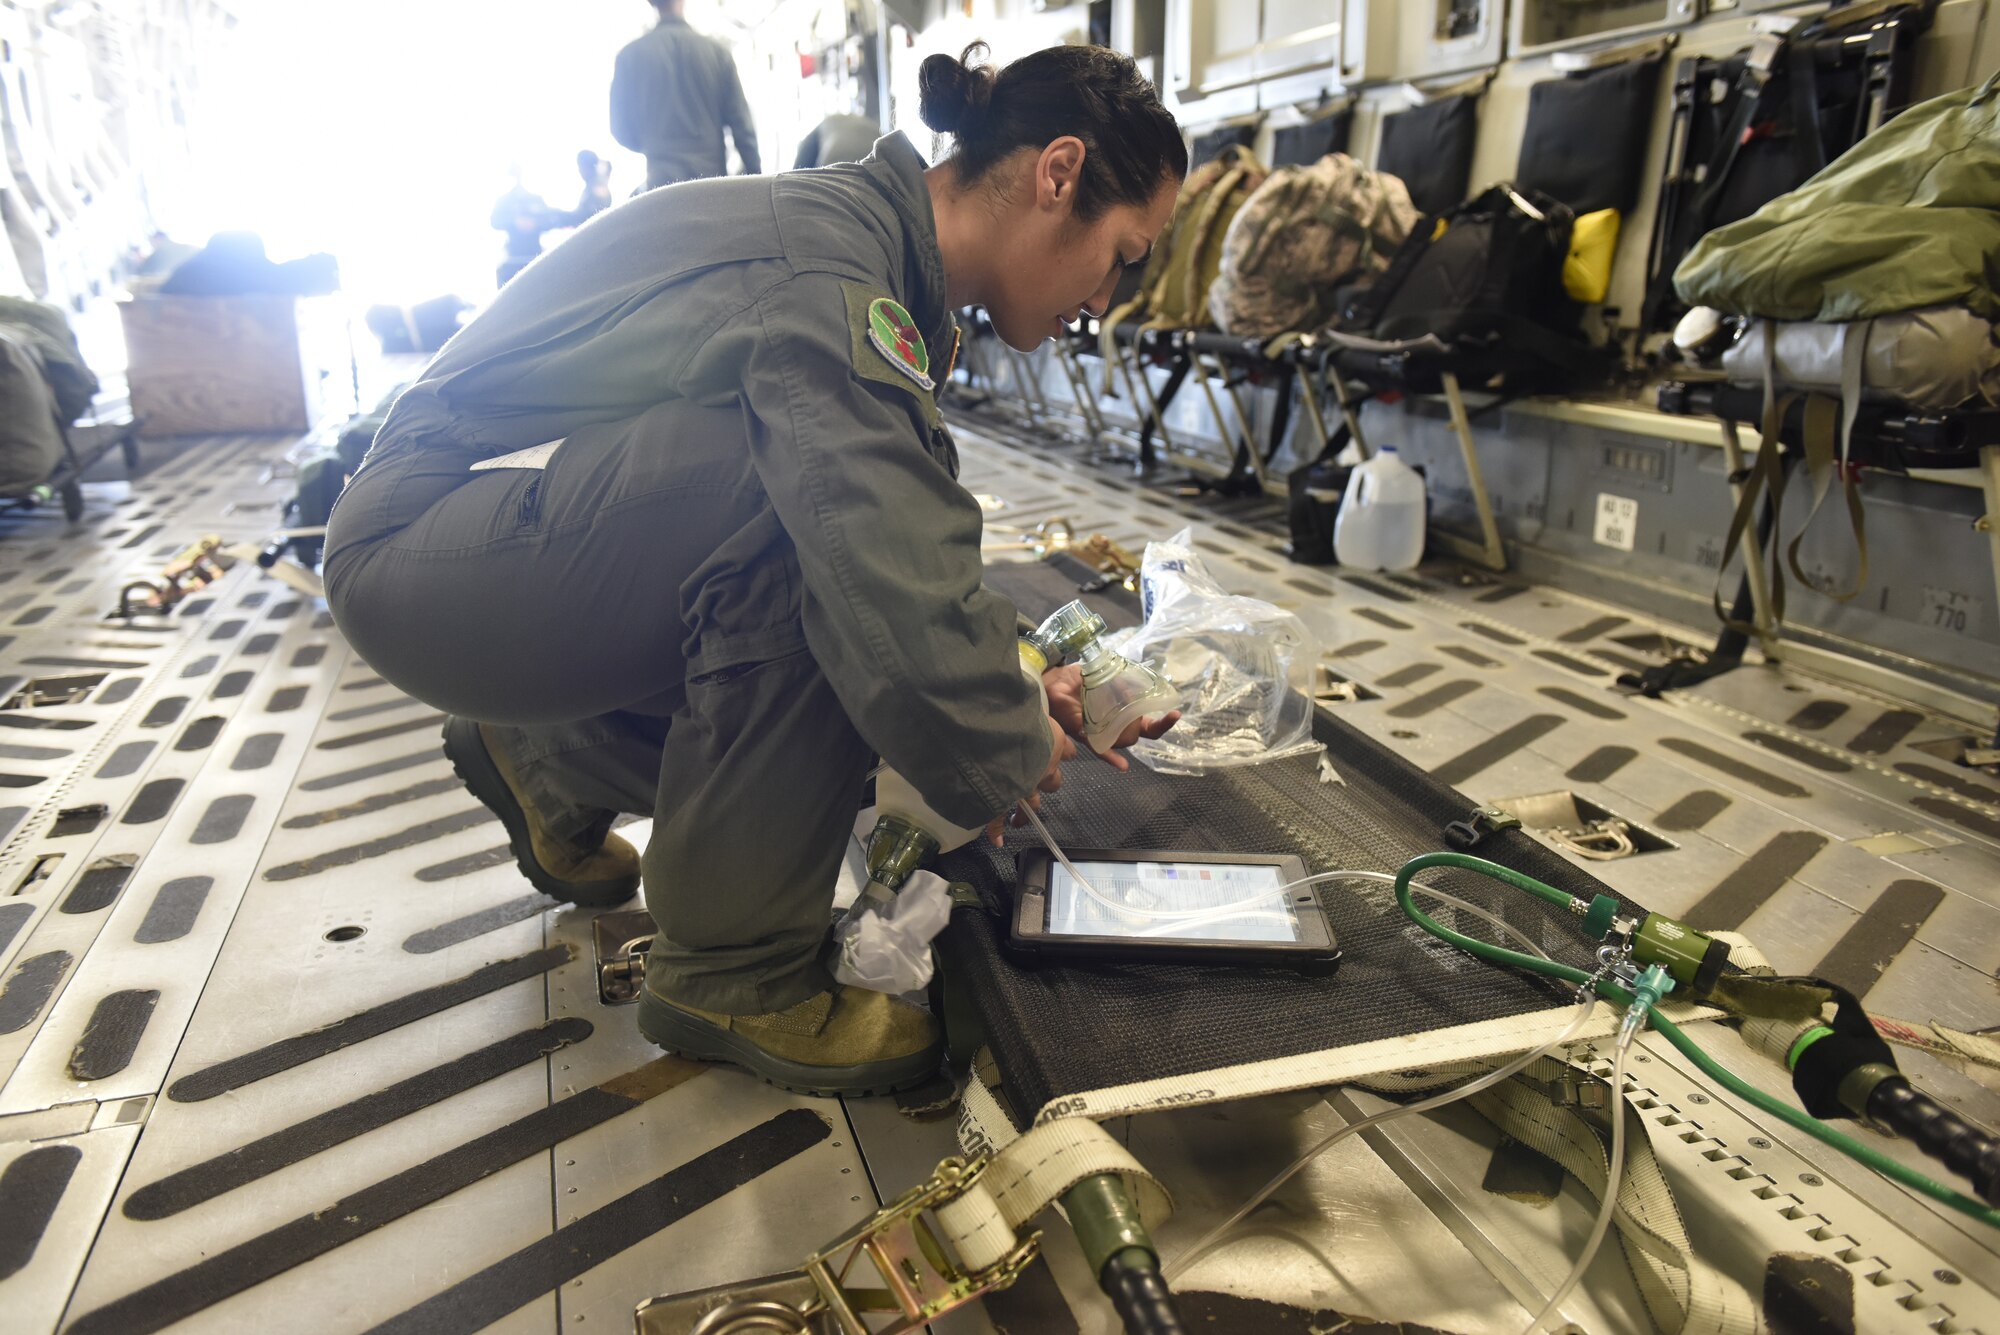 U.S. Air Force Airman 1st Class Kiara Rivera Cortes, 156th Aeromedical Evacuation Squadron, checks medical equipment aboard a C-17 Globemaster III aircraft prior to takeoff at the North Carolina Air National Guard Base, Charlotte Douglas International Airport, for transport to Volk Field Air National Guard Base, Wisconsin, for a training exercise, July 9, 2018. (U.S. Air Force photo by Tech. Sgt. Nathan Clark)